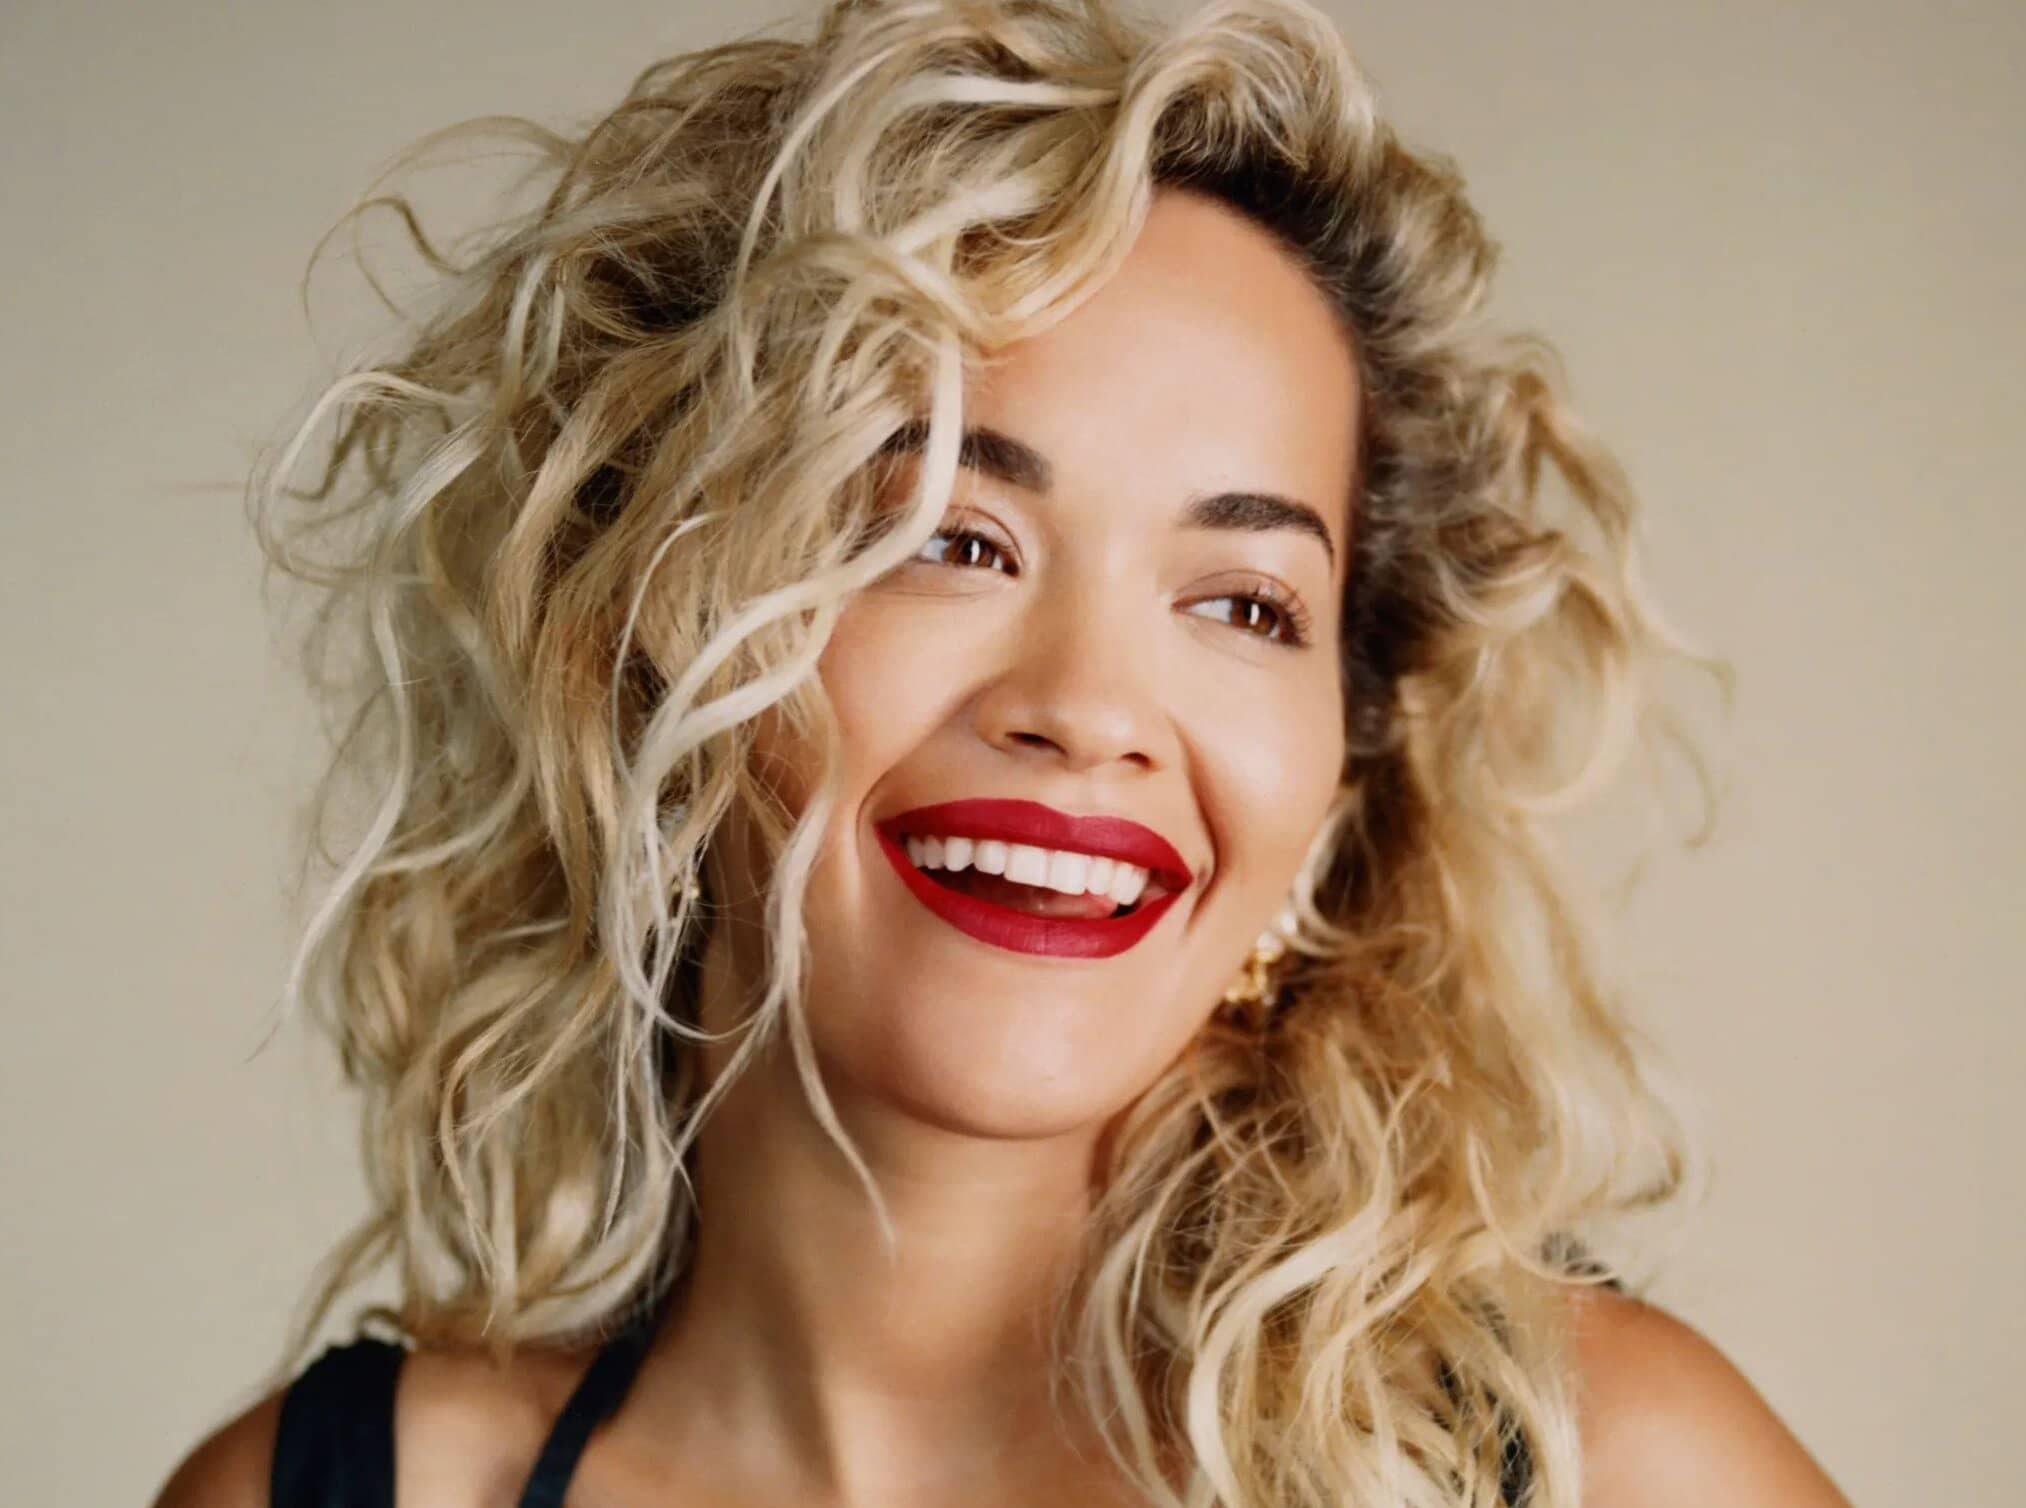 Rita ora, benee and shapeshifter set to light up rugby world cup 2021